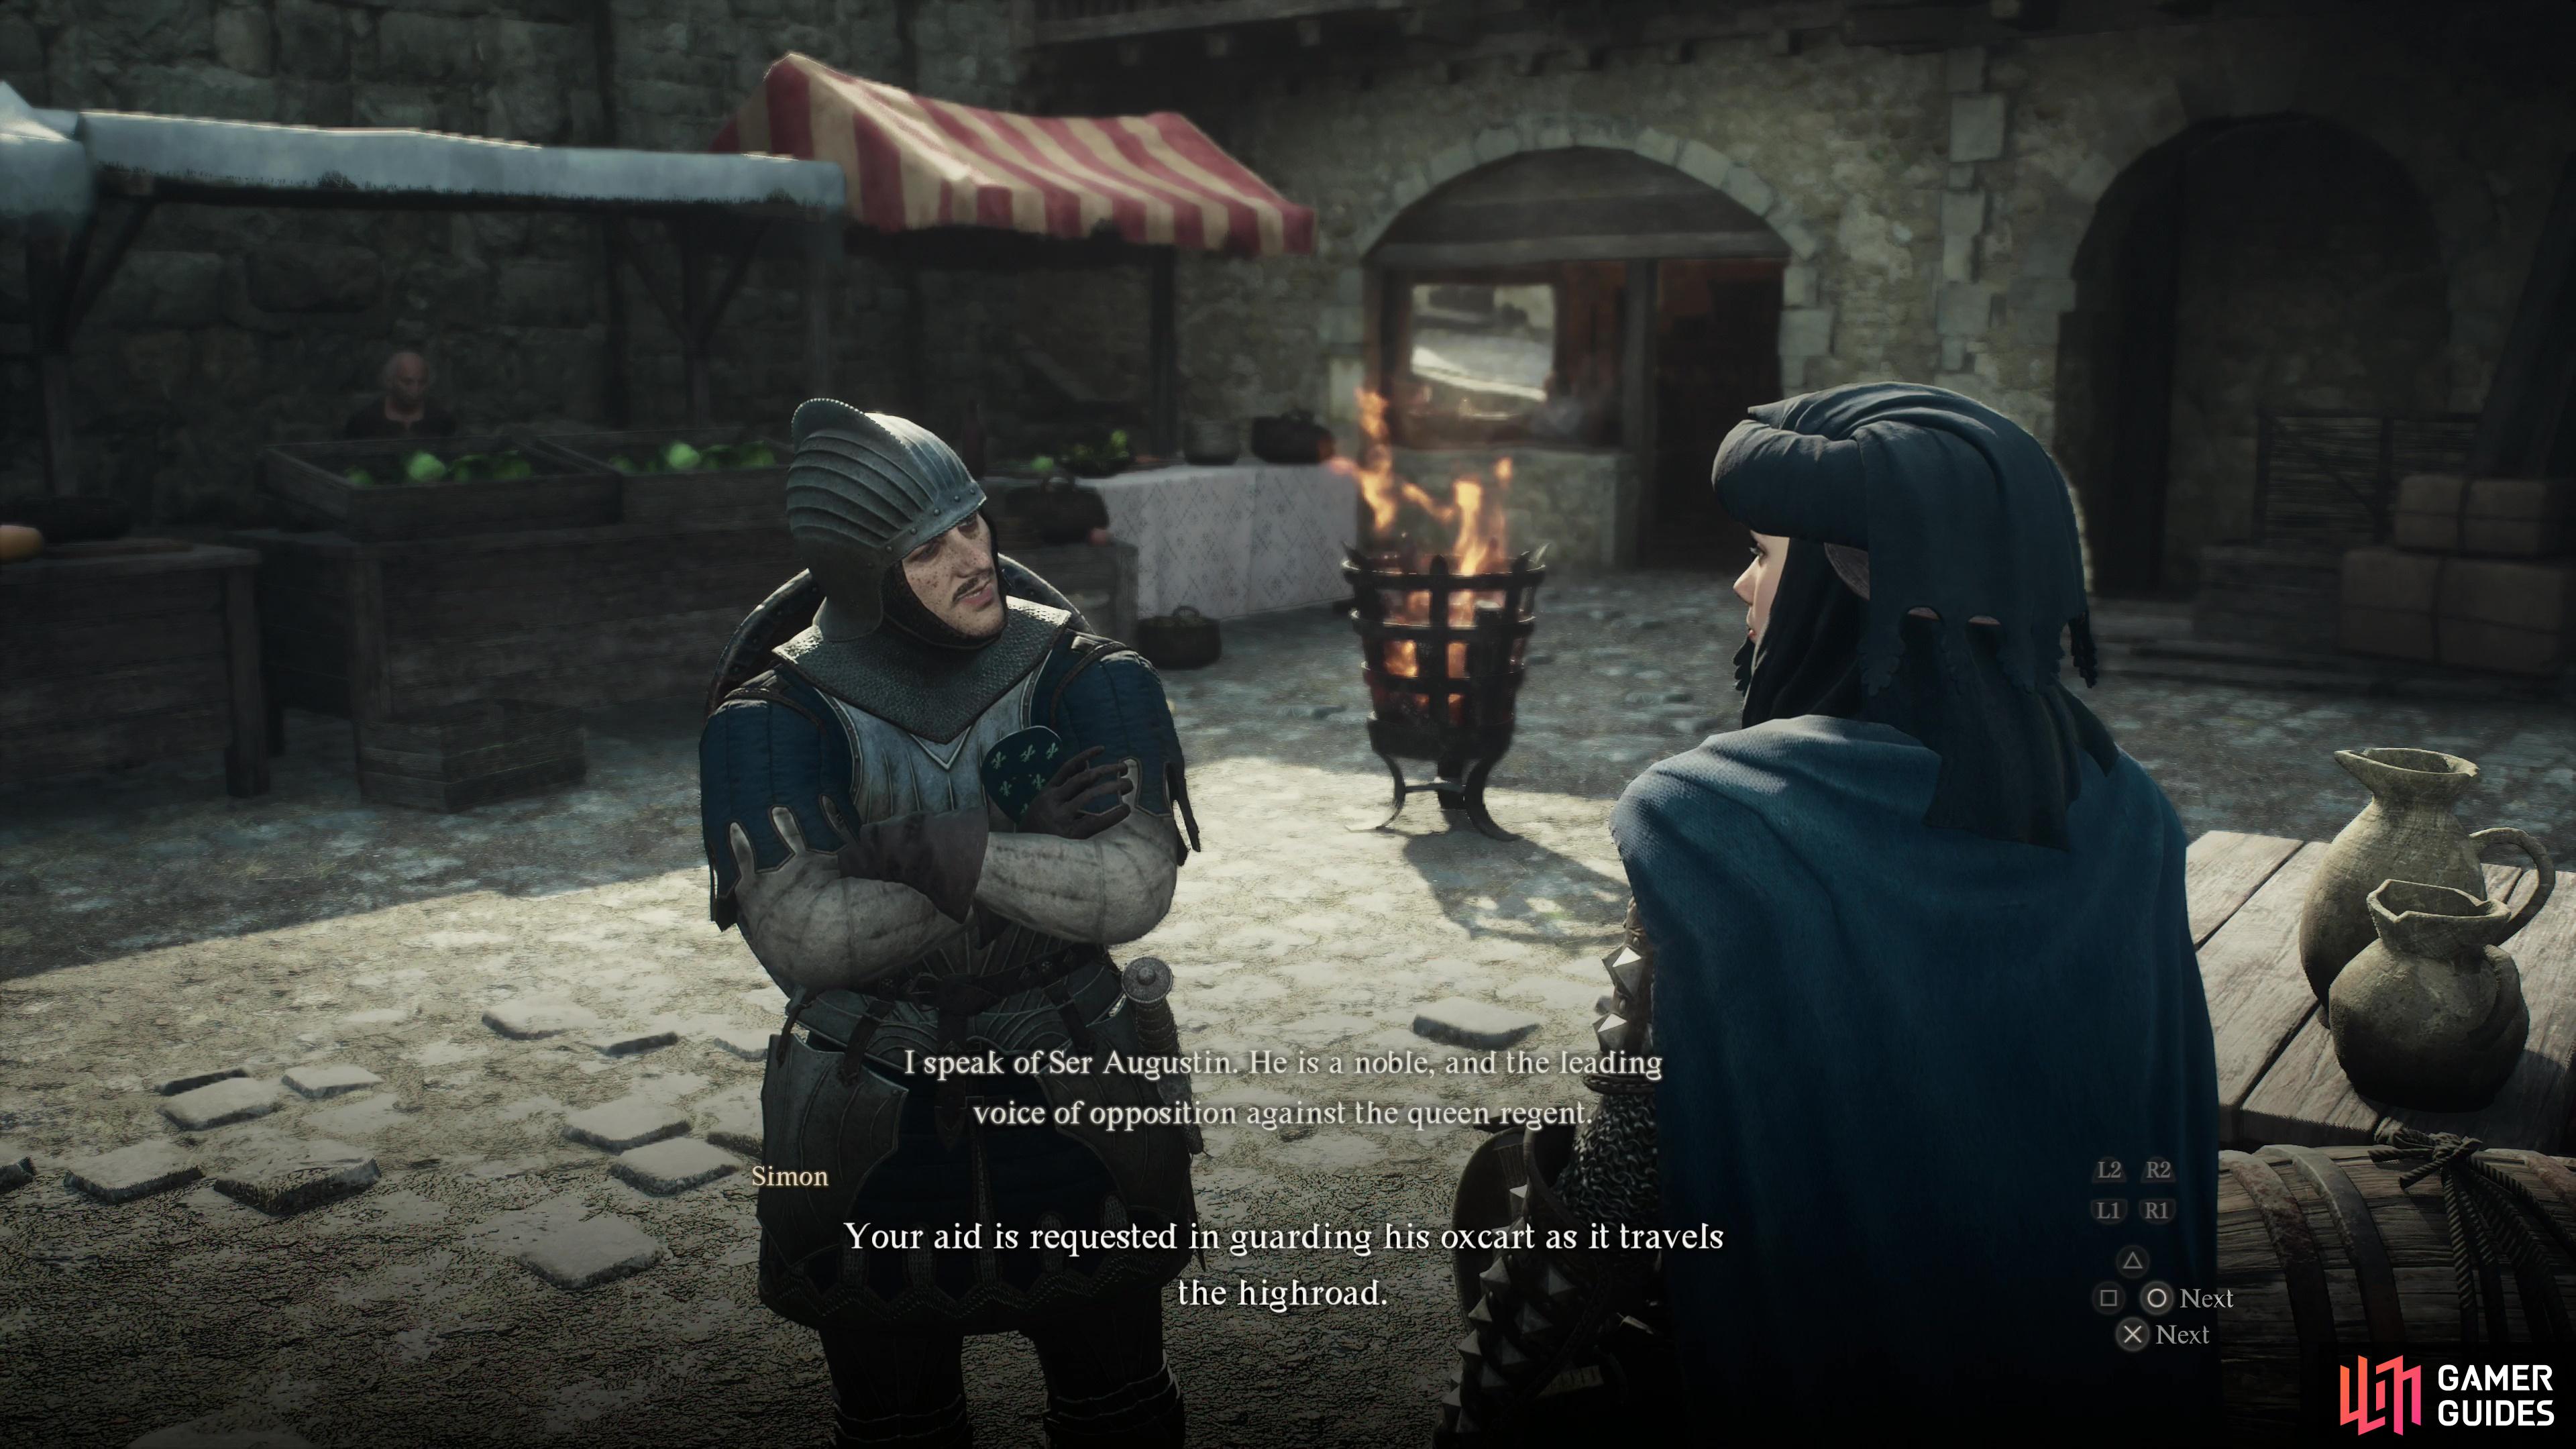 Sometimes NPCs will come demand you attend to some task, but many quests in Dragon’s Dogma 2 are more subtle - talk to NPCs often to ensure you’re not missing any quests!